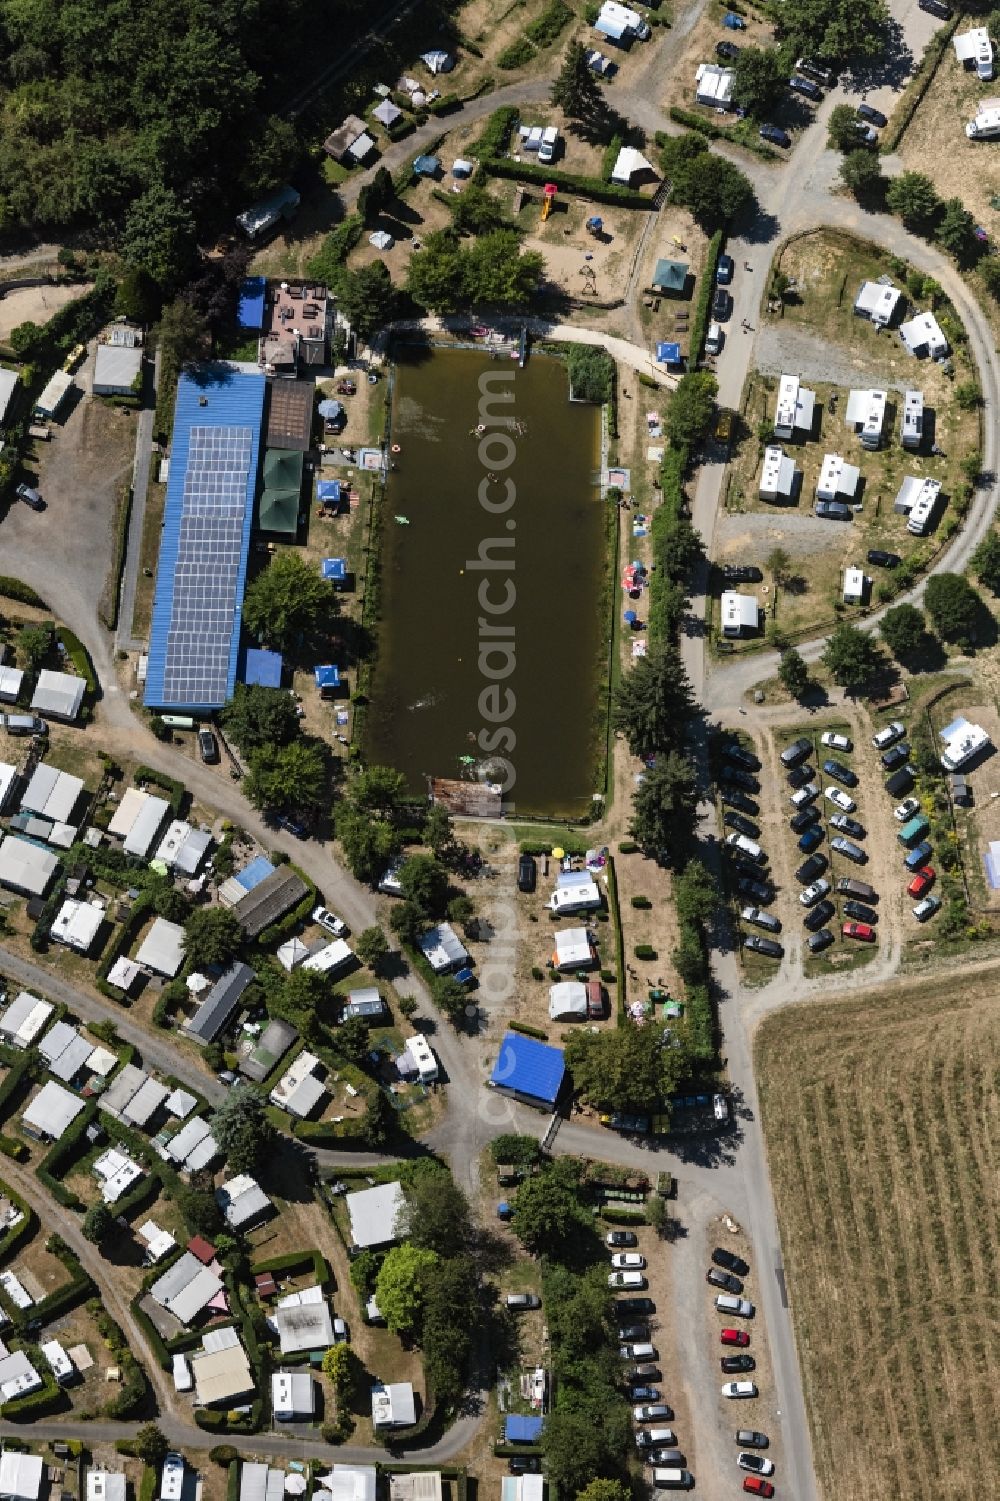 Fischbachtal from above - Camping with caravans and tents in Fischbachtal in the state Hesse, Germany